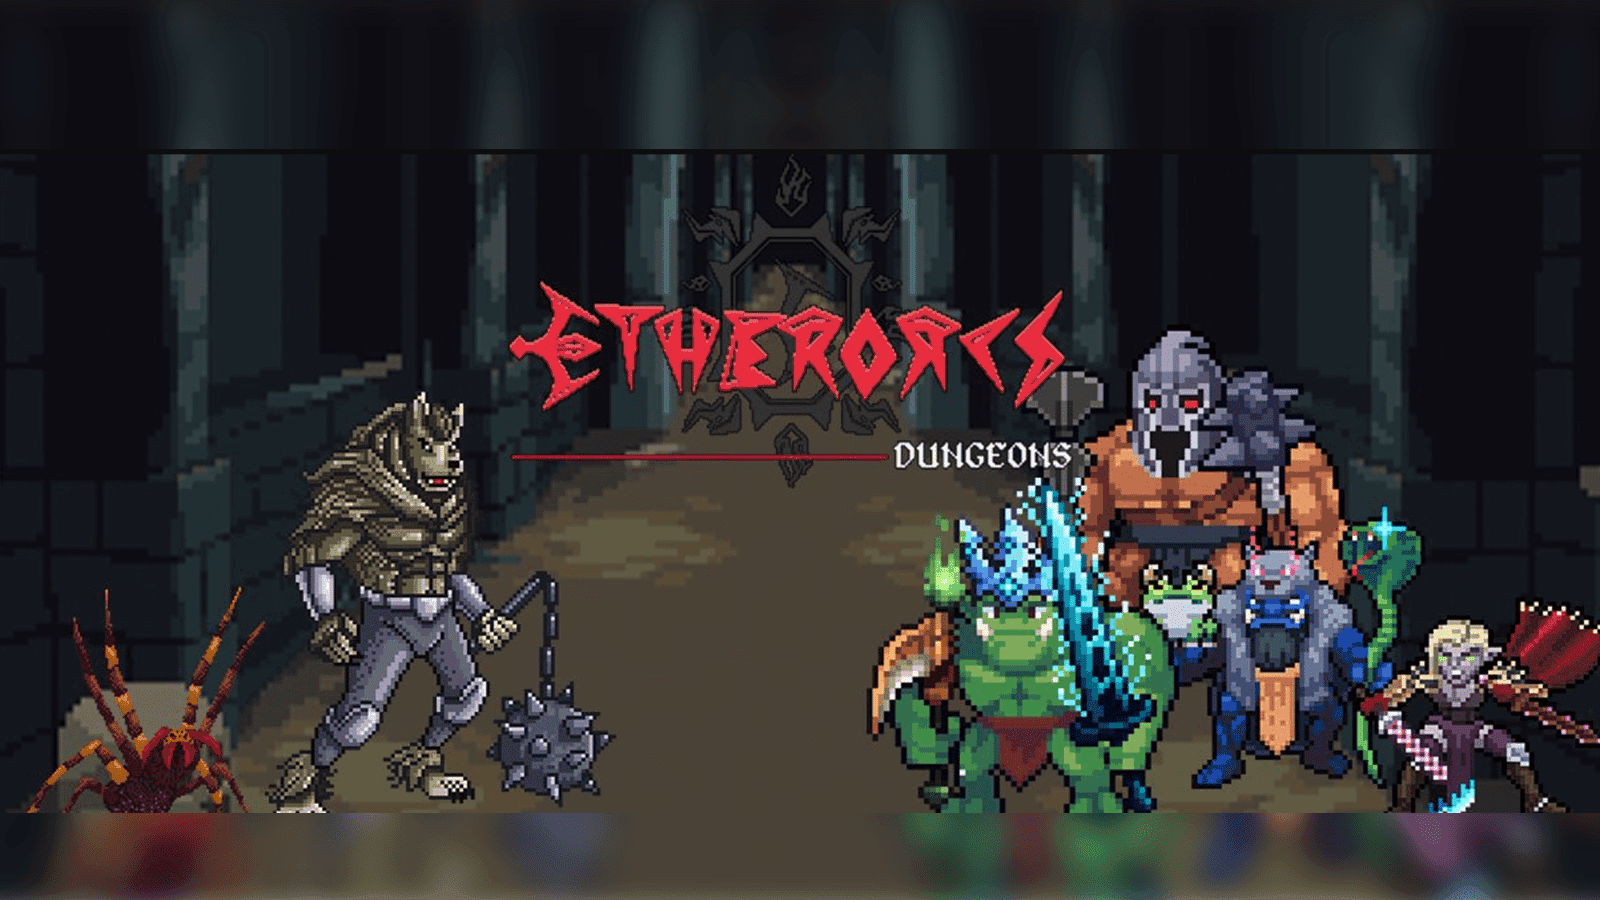 Etherorcs - Game Review - Play Games